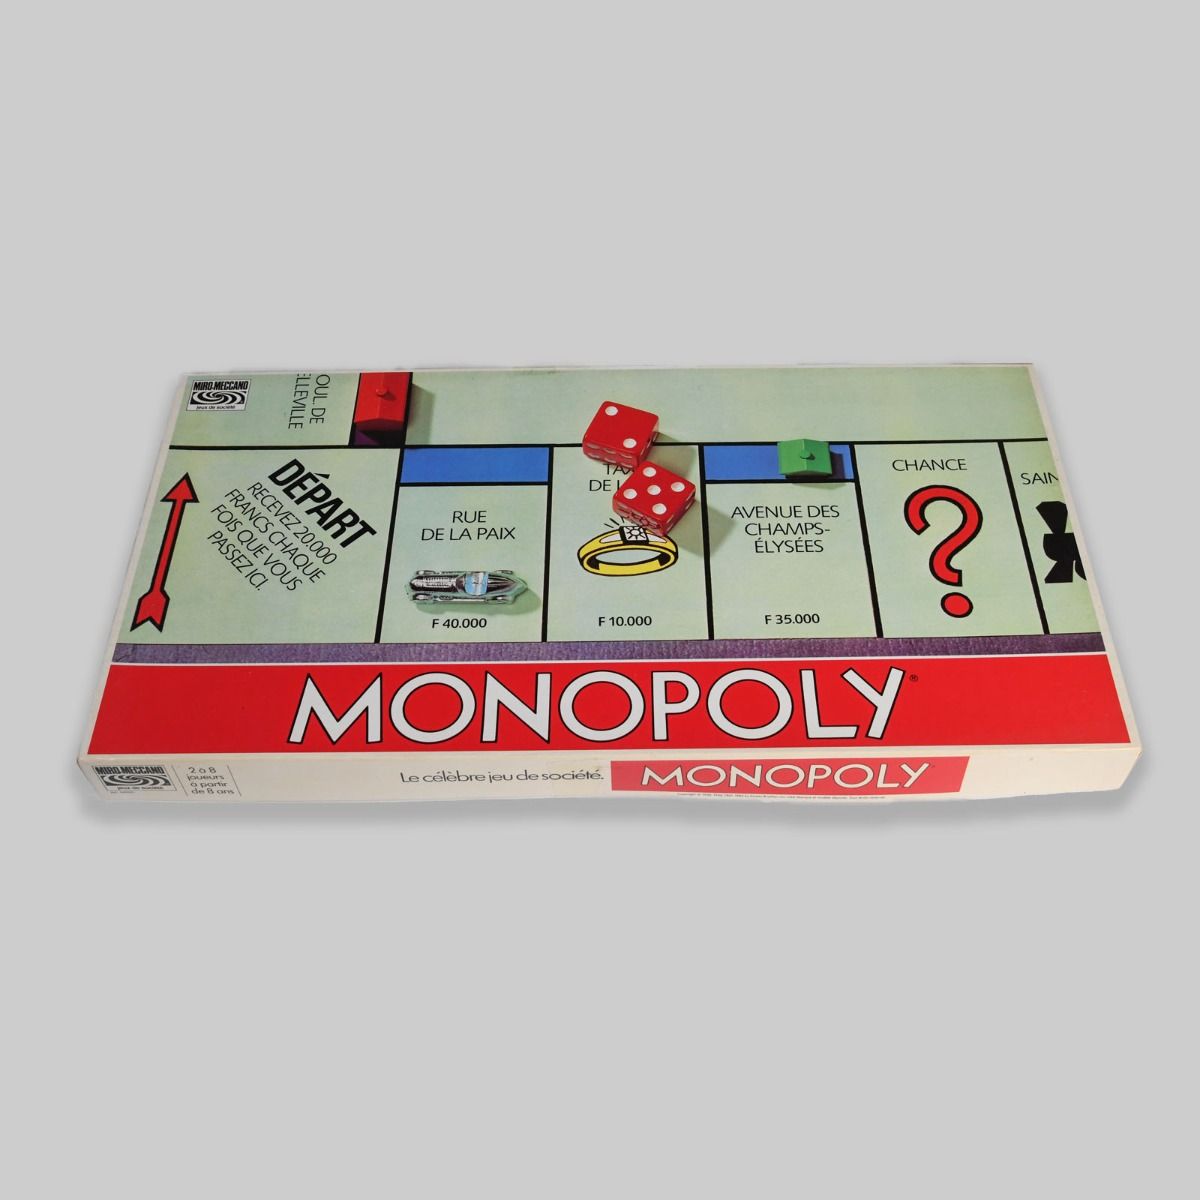 'Monopoly' 1985 French Language Board Game